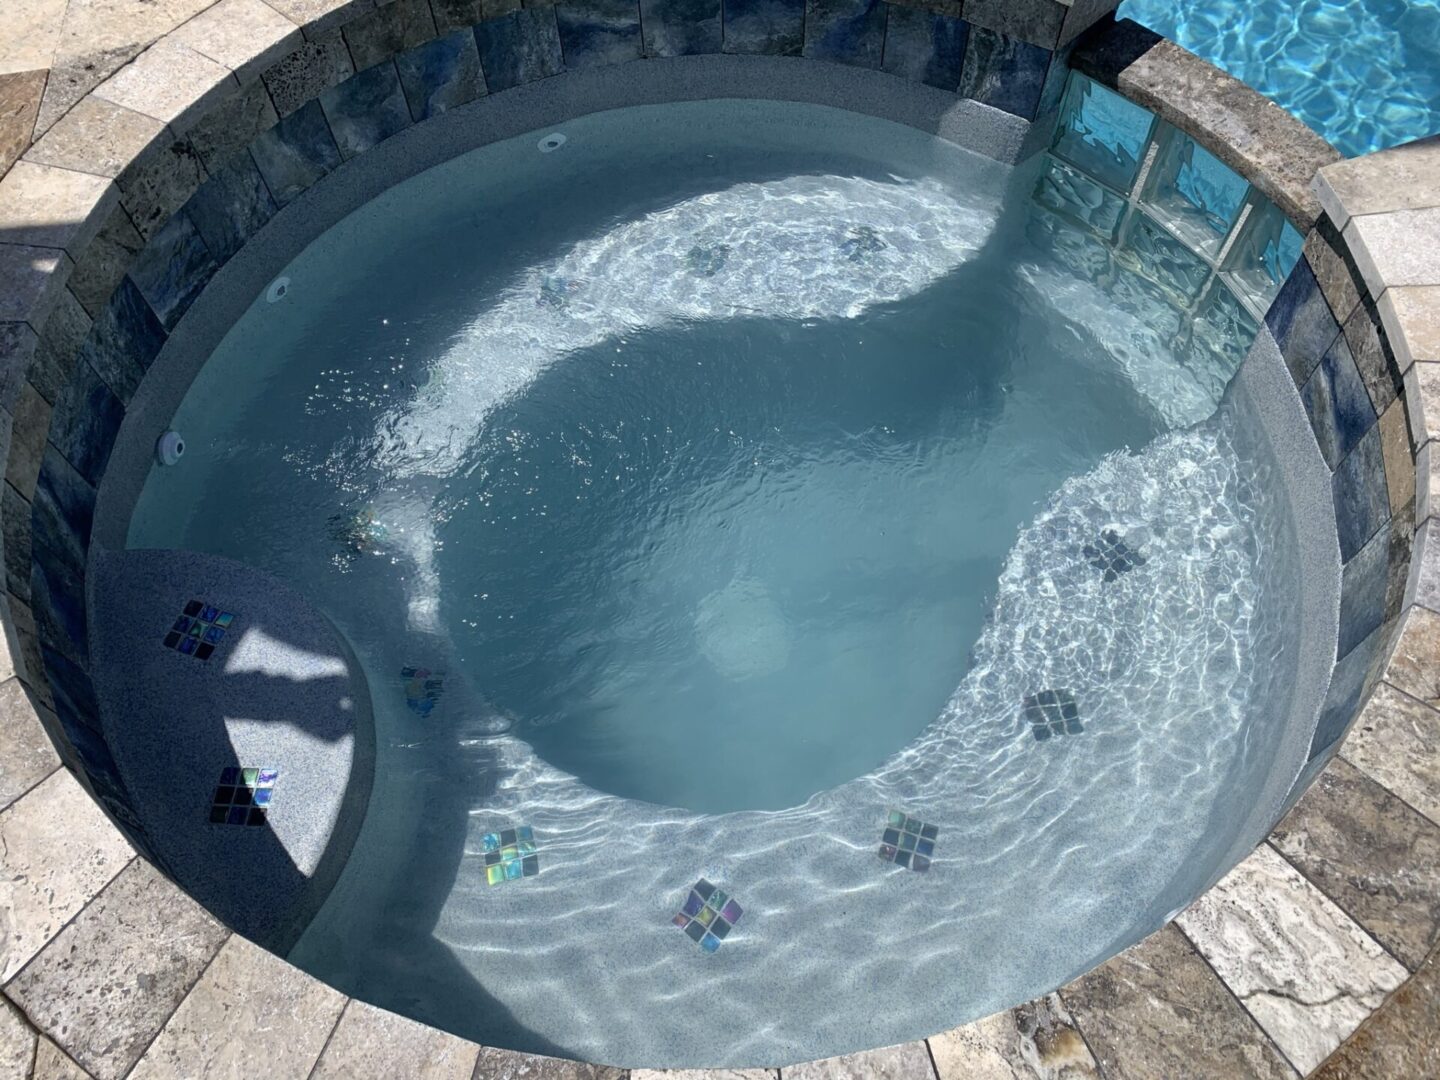 A stone-tiled hot tub filled with water is connected to a swimming pool. Sunlight casts shadows, including one from a nearby person.